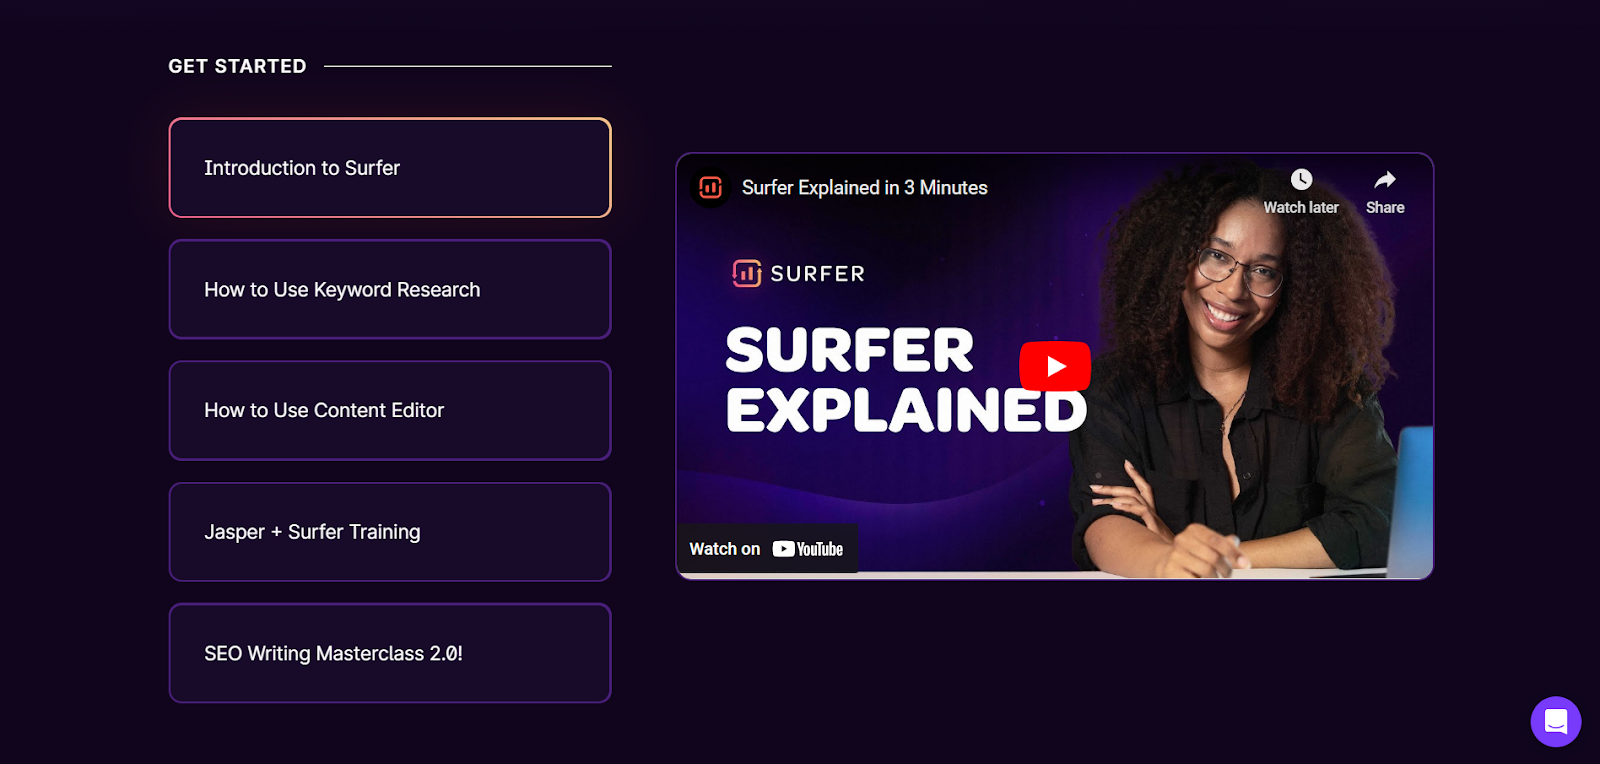 Example of customer success efforts from SurferSEO